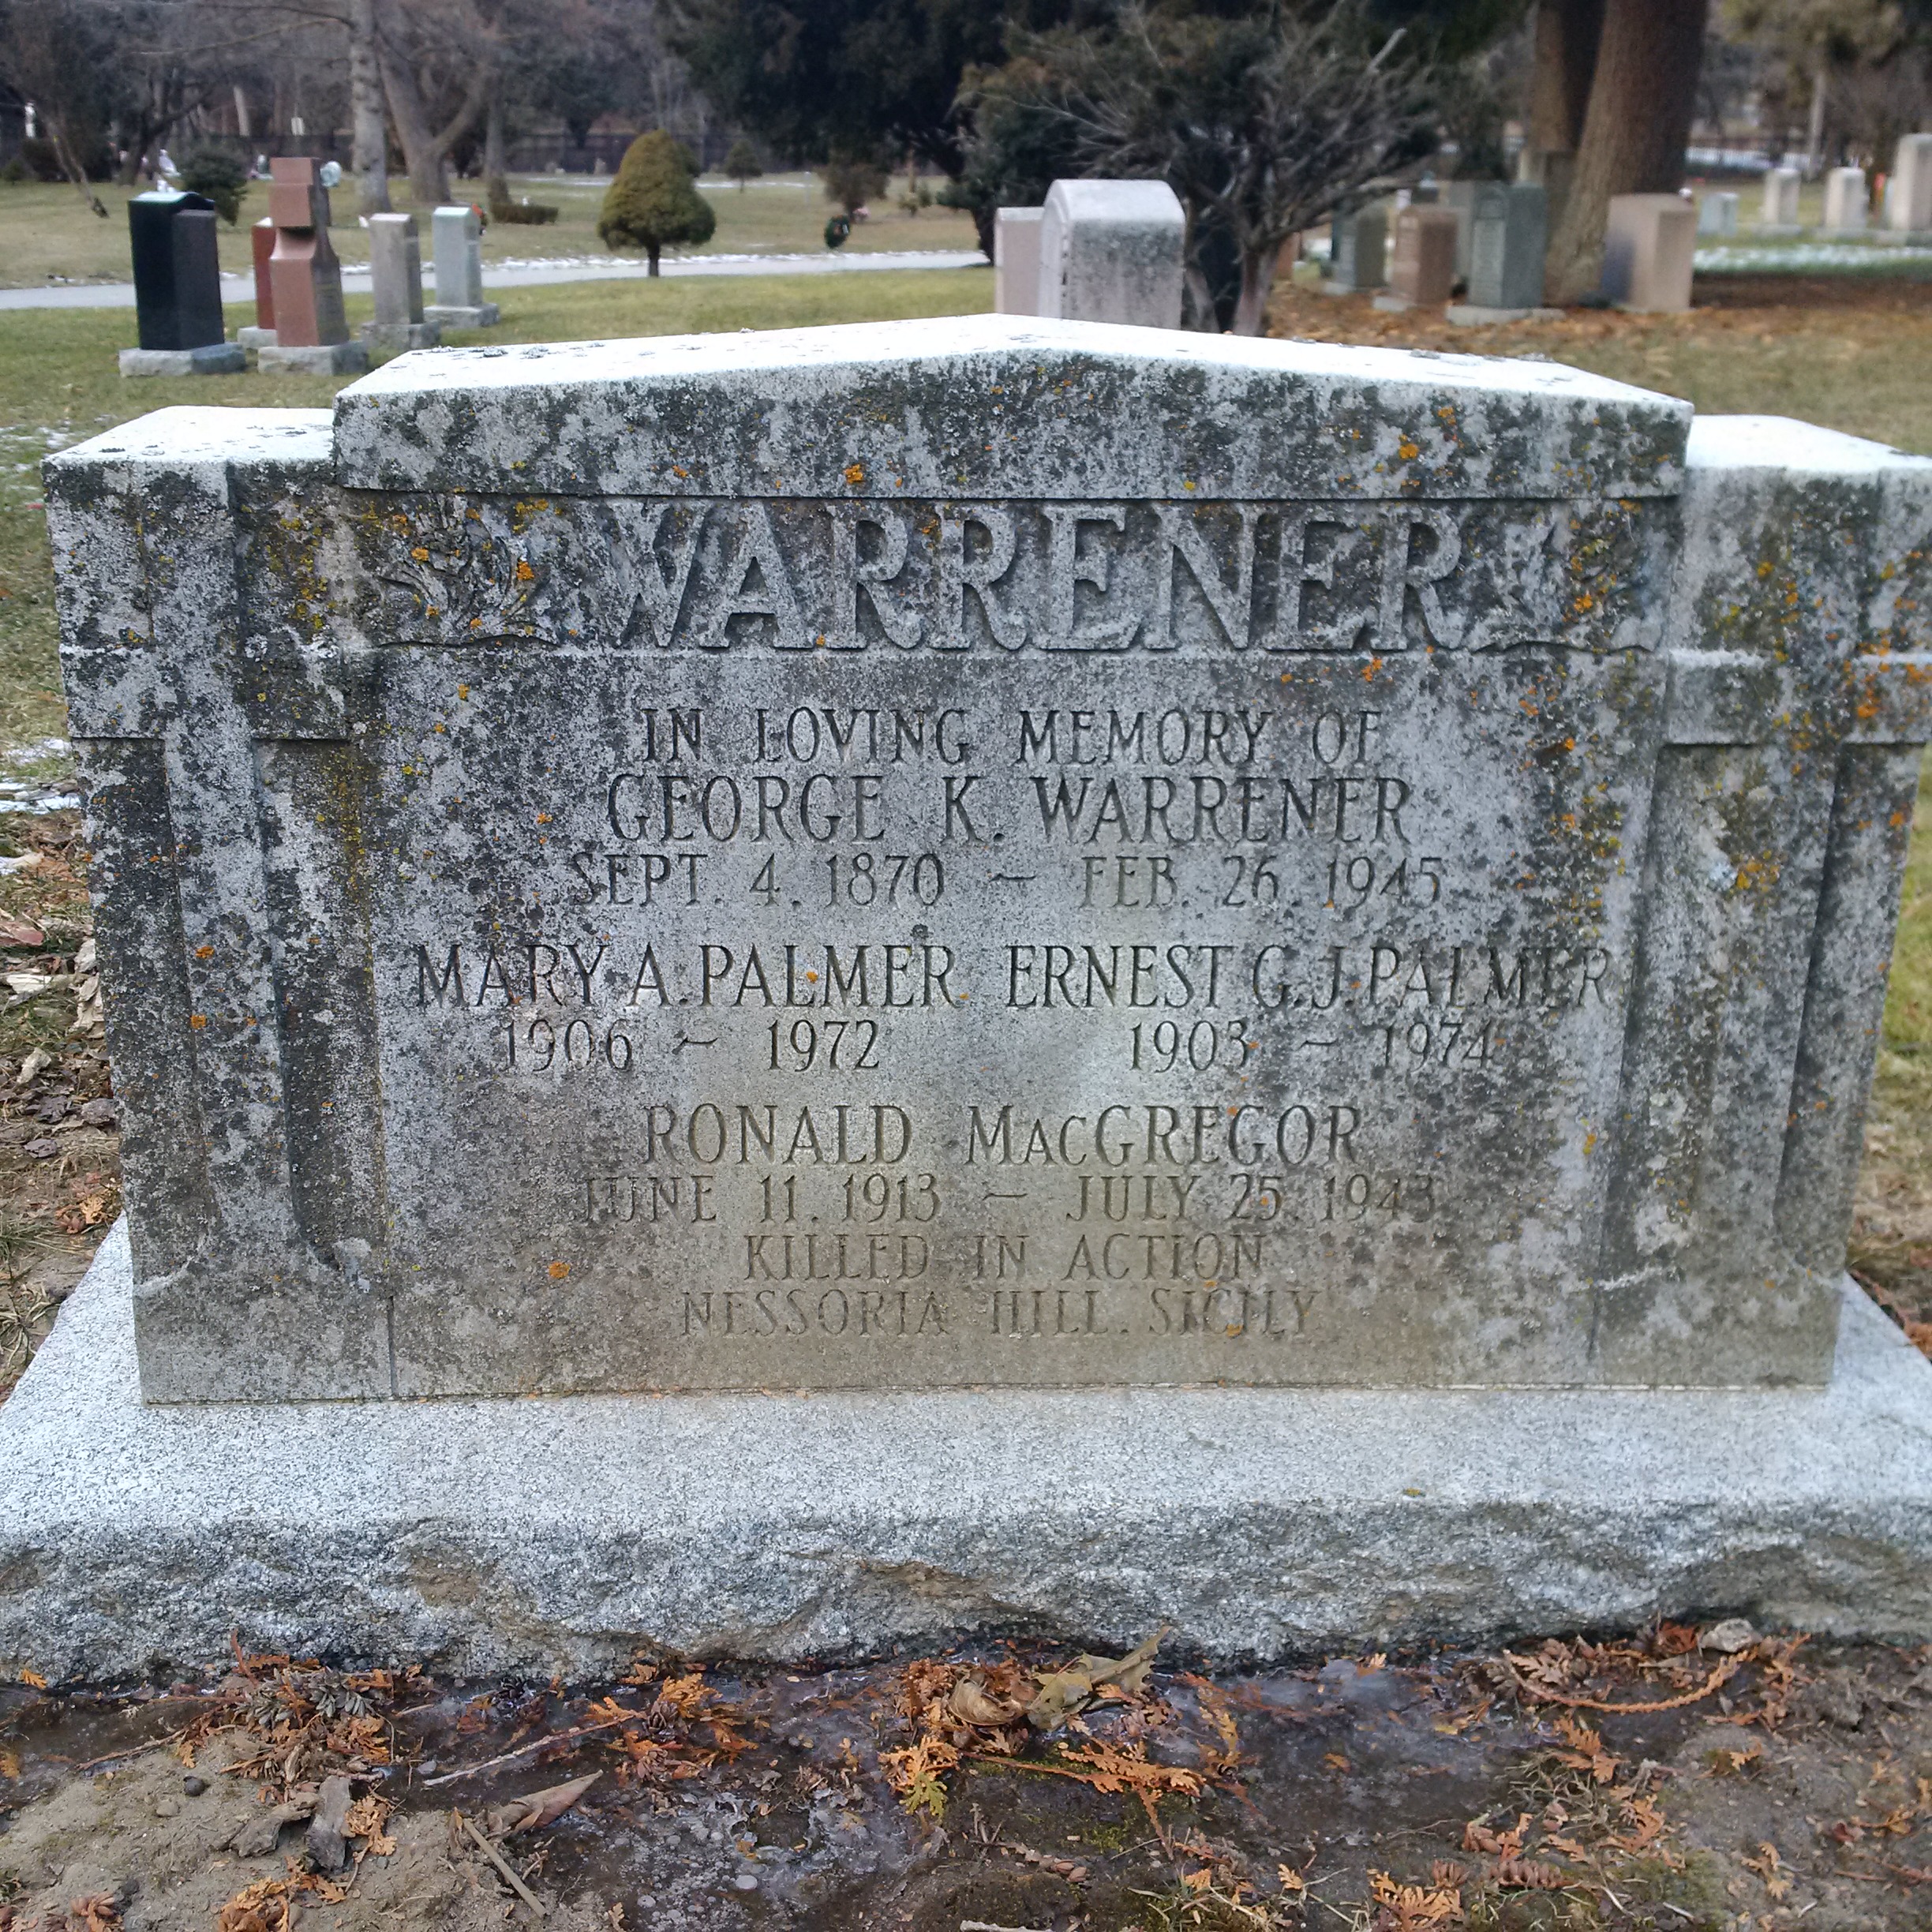 Find a Grave, database and images (https://www.findagrave.com/memorial/169703644/george-kaye-warrener : accessed 9 February 2022), memorial page for George Kaye Warrener (1870–1945), Find a Grave Memorial ID 169703644, citing Prospect Cemetery, Toronto, Toronto Municipality, Ontario, Canada ; Maintained by Family Foliage (contributor 49085284).